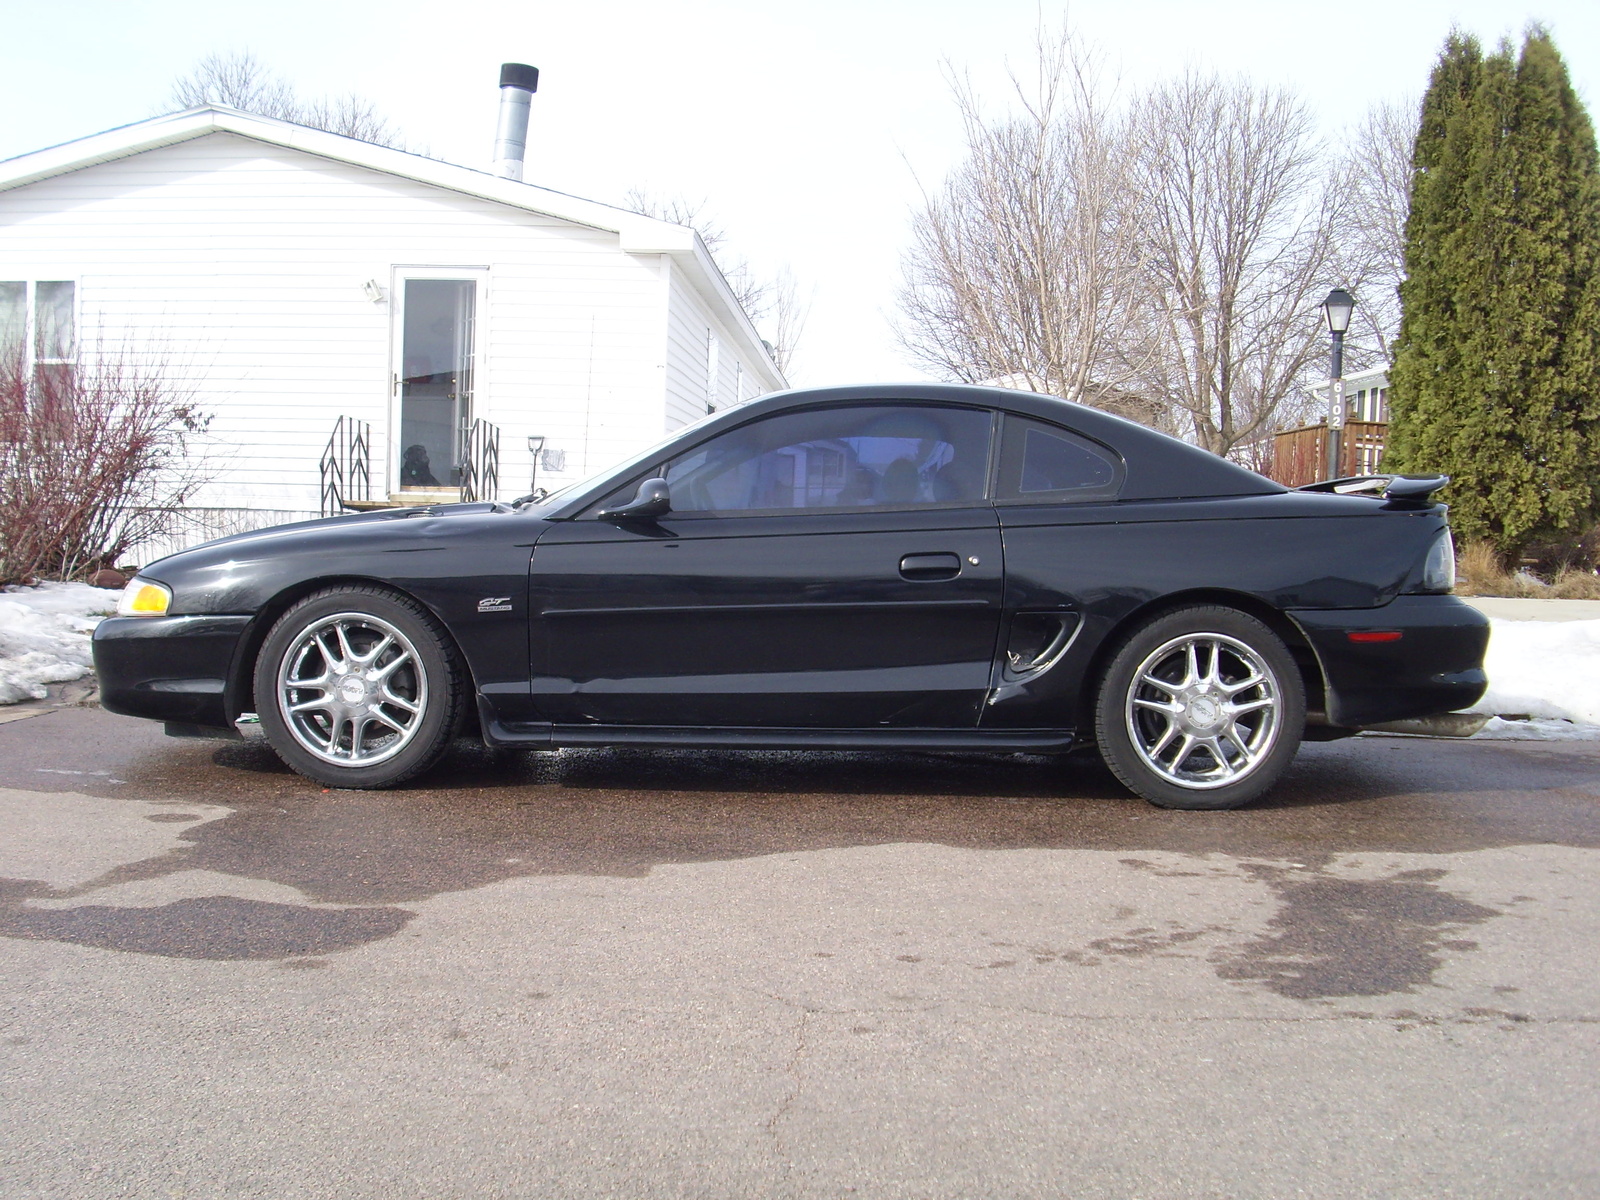 1995 Ford mustang gt coupe specs #7